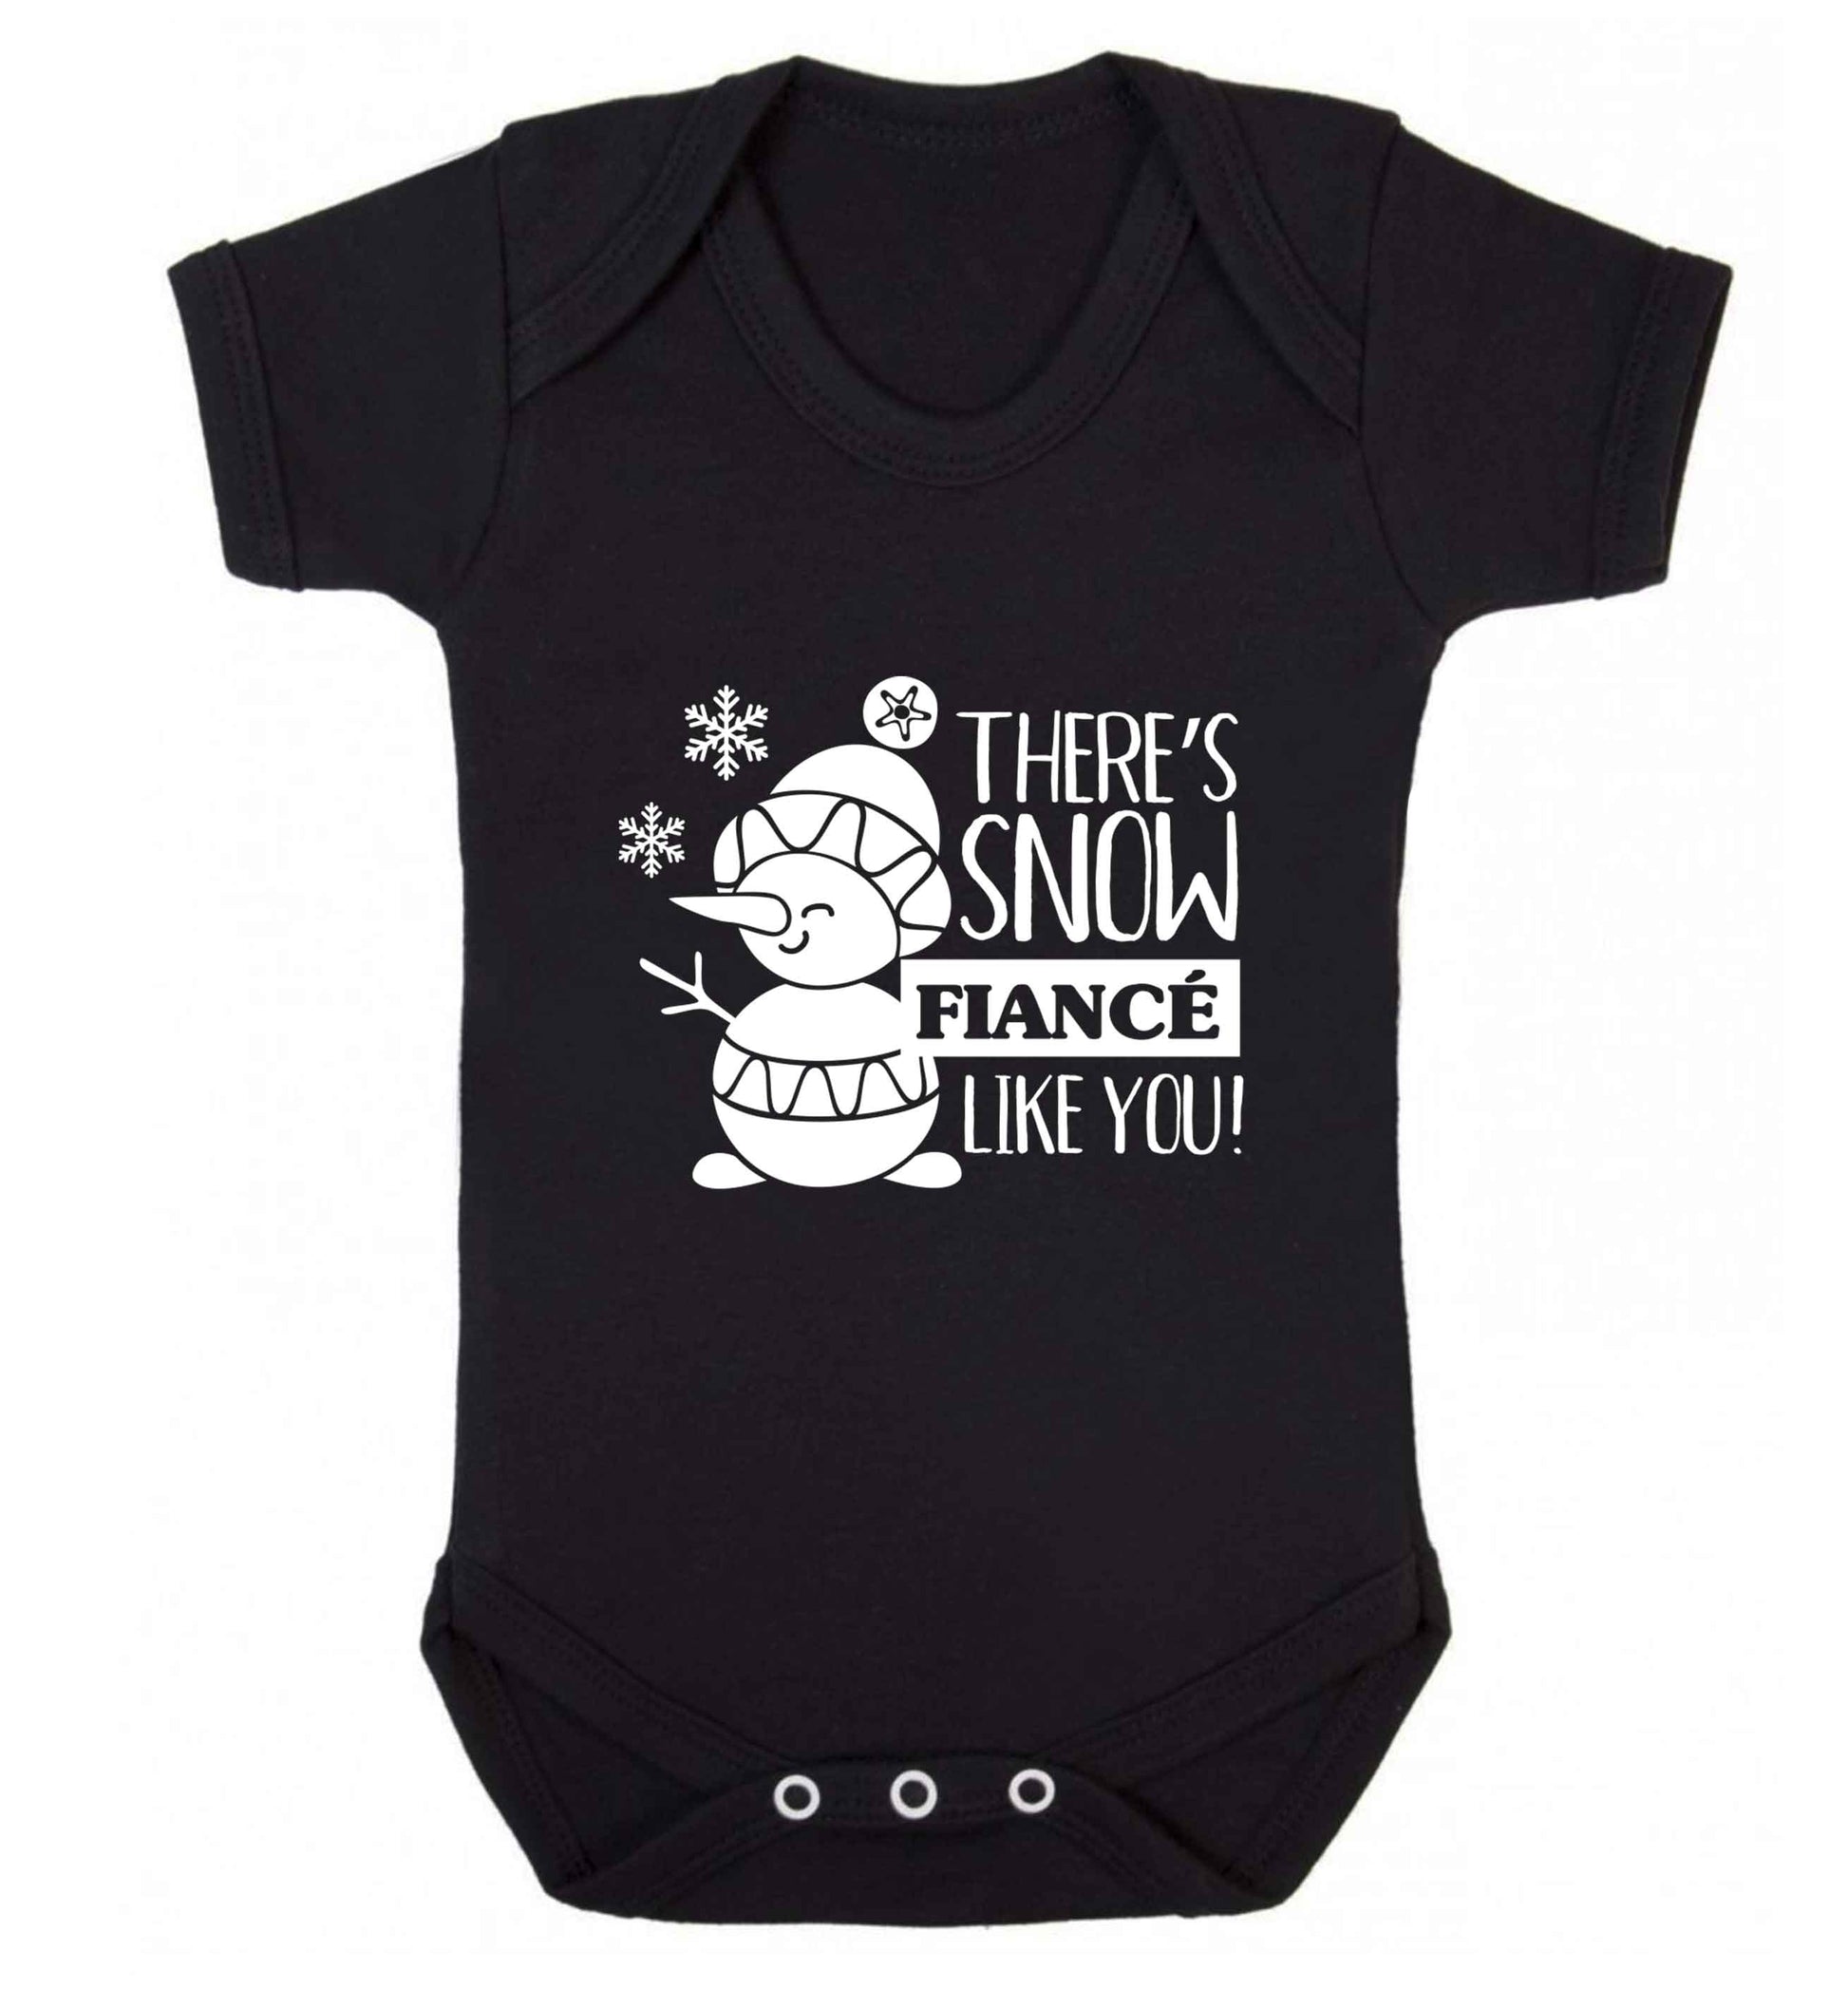 There's snow fiance like you baby vest black 18-24 months